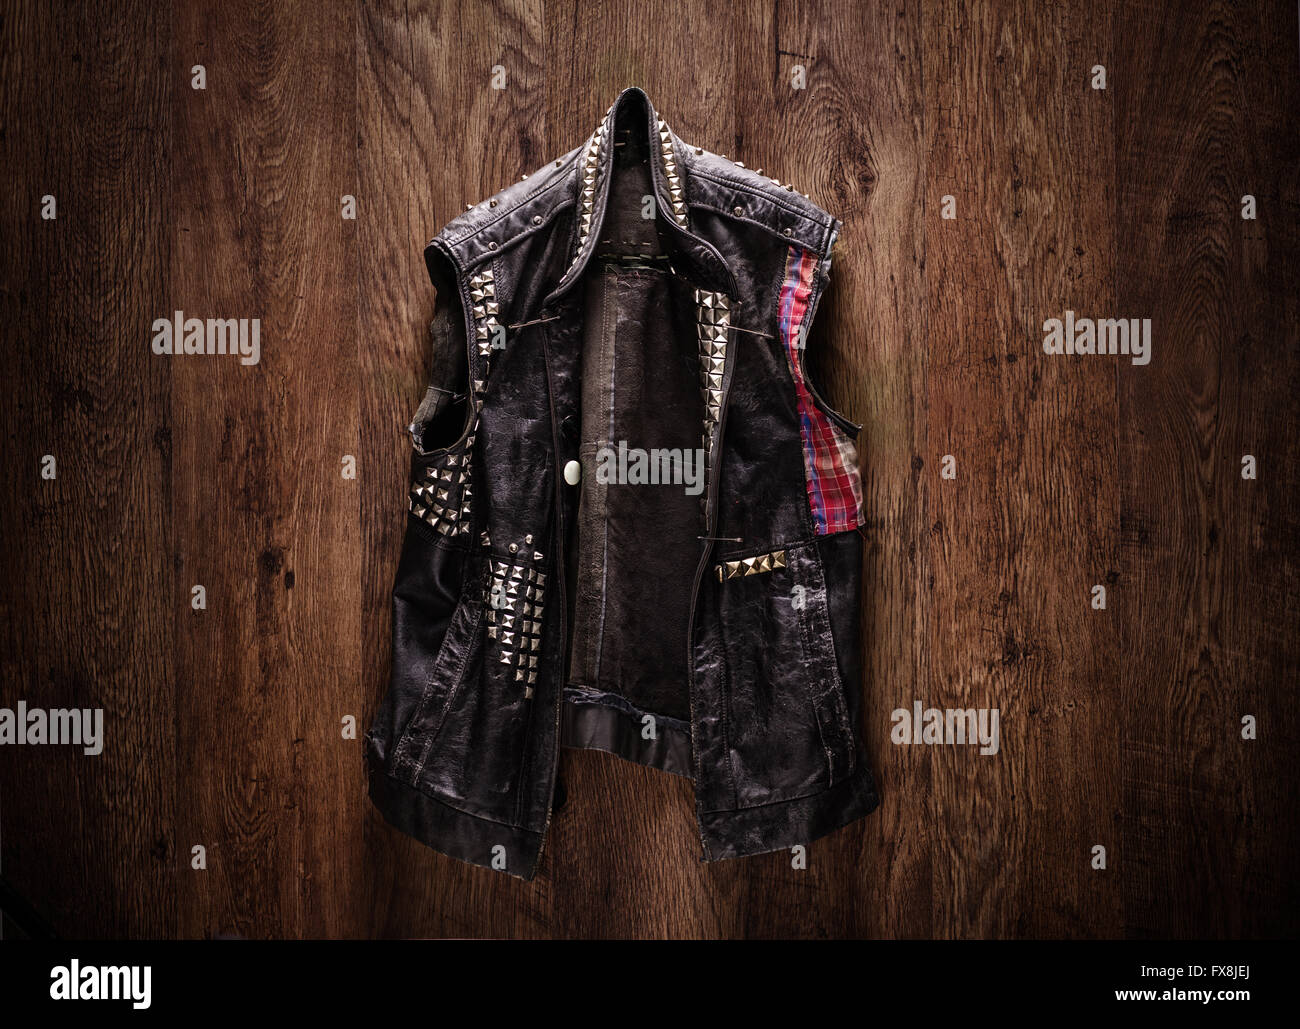 Old-school punk-rock leather jacket hanging on a wooden background Stock Photo